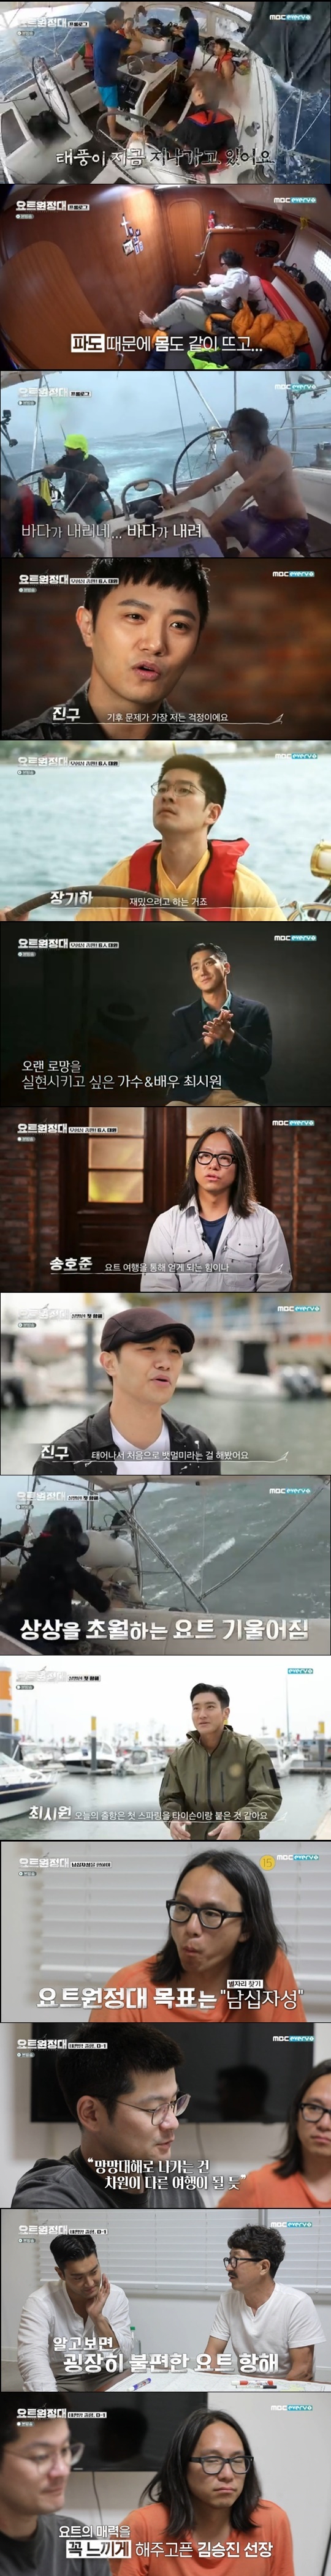 Jin Goo, Choi Siwon, Chang Kiha and Song Ho-joon began their Pacific Ocean voyage.MBC Everlon Yacht Expedition, which was first broadcast on August 17, was depicted by Jin Goo, Choi Siwon, Chang Kiha and Song Ho-joon, who had dreamed of adventure, to top model on Pacific Ocean voyage with yacht.In the prologue, members sailing Pacific Ocean with yacht were featured.The members who met the typhoon in the net were hit by the waves and the body was hit by the whole body.Kim Seung-jin Sea captain said, Most of the first people to ride the yacht, you must have felt that yacht was not the luxury we thought.The preconceptions that were trapped in the framework of society have gradually disappeared. The biggest interest is what kind of sea to engrave in them.The four members explained why Top Model was before they left the full-scale voyage. Jin Goo said, I have always dreamed of a navigator.The most worrying thing is climate, Chang Kiha said. If you live as you live, youre bored.I have traveled to the desert while living in a camper car, he said. I have never been disappointed in traveling to nature.Everyone had a romance, and one of them was going out on a boat, said Choi Siwon, and Im so excited to sit on the deck and enjoy the beauty of nature.Im called an art writer, and Im working on a big project, such as media art and the launch of a personal satellite, rather than writing, Song said.The power gained from the yacht trip seems to be helpful to life. Kim Seung-jin Sea captain and four people, team doctor had their first meeting.Kim Seung-jin explained that the boat with the yacht expedition is the best boat to fight against with five rooms, a large living room, a kitchen, and a bathroom in each room.Kim Seung-jin said, I can meet a typhoon on this voyage. Choi Siwon applauded the expectation without knowing what would happen next.The four learned how to start, mooring knots, anchoring, and how to use the bathroom as Kim Seung-jin Sea captain instructed, and went on his first Embarkation for Cythera.The Vikings dont swing back and forth, said Jin Goo, who began the voyage, but Yacht was surprised to be shaken by both sides.Soon Jin Goo started seasickness and realized the power of the waves, saying, I tried to see the floor but I saw the sea.Choi Siwon, who finished his first Embarkation for Cythera safely, said, It felt like the first sparring was attached to Tyson. Chang Kiha said, It was fun.This is a good sail, he said.With the Embarkation for Cythera a day away, Kim Seung-jin Sea captain and the four carried a huge amount of water and food to eat for 20 days.The yacht expedition then enjoyed its last dinner on land.The cast and staff were diagnosed with a voice in the Covid test, and Kim Seung-jin Sea captain said, There is no anchorage to accept us because of Covid.We will sail with the aim of the constellation South Cross, he said.Kim Seung-jin Sea captain refers to the Bermuda Triangle, where ship and aircraft missing incidents are frequent, and says, It is a dragon triangular zone similar to the Bermudy Triangle on our way.We have to be nervous and look around in the middle of the clock, he said, straining the members. Yacht is a very uncomfortable journey.Nevertheless, I am trying to take you because you are so satisfied. 